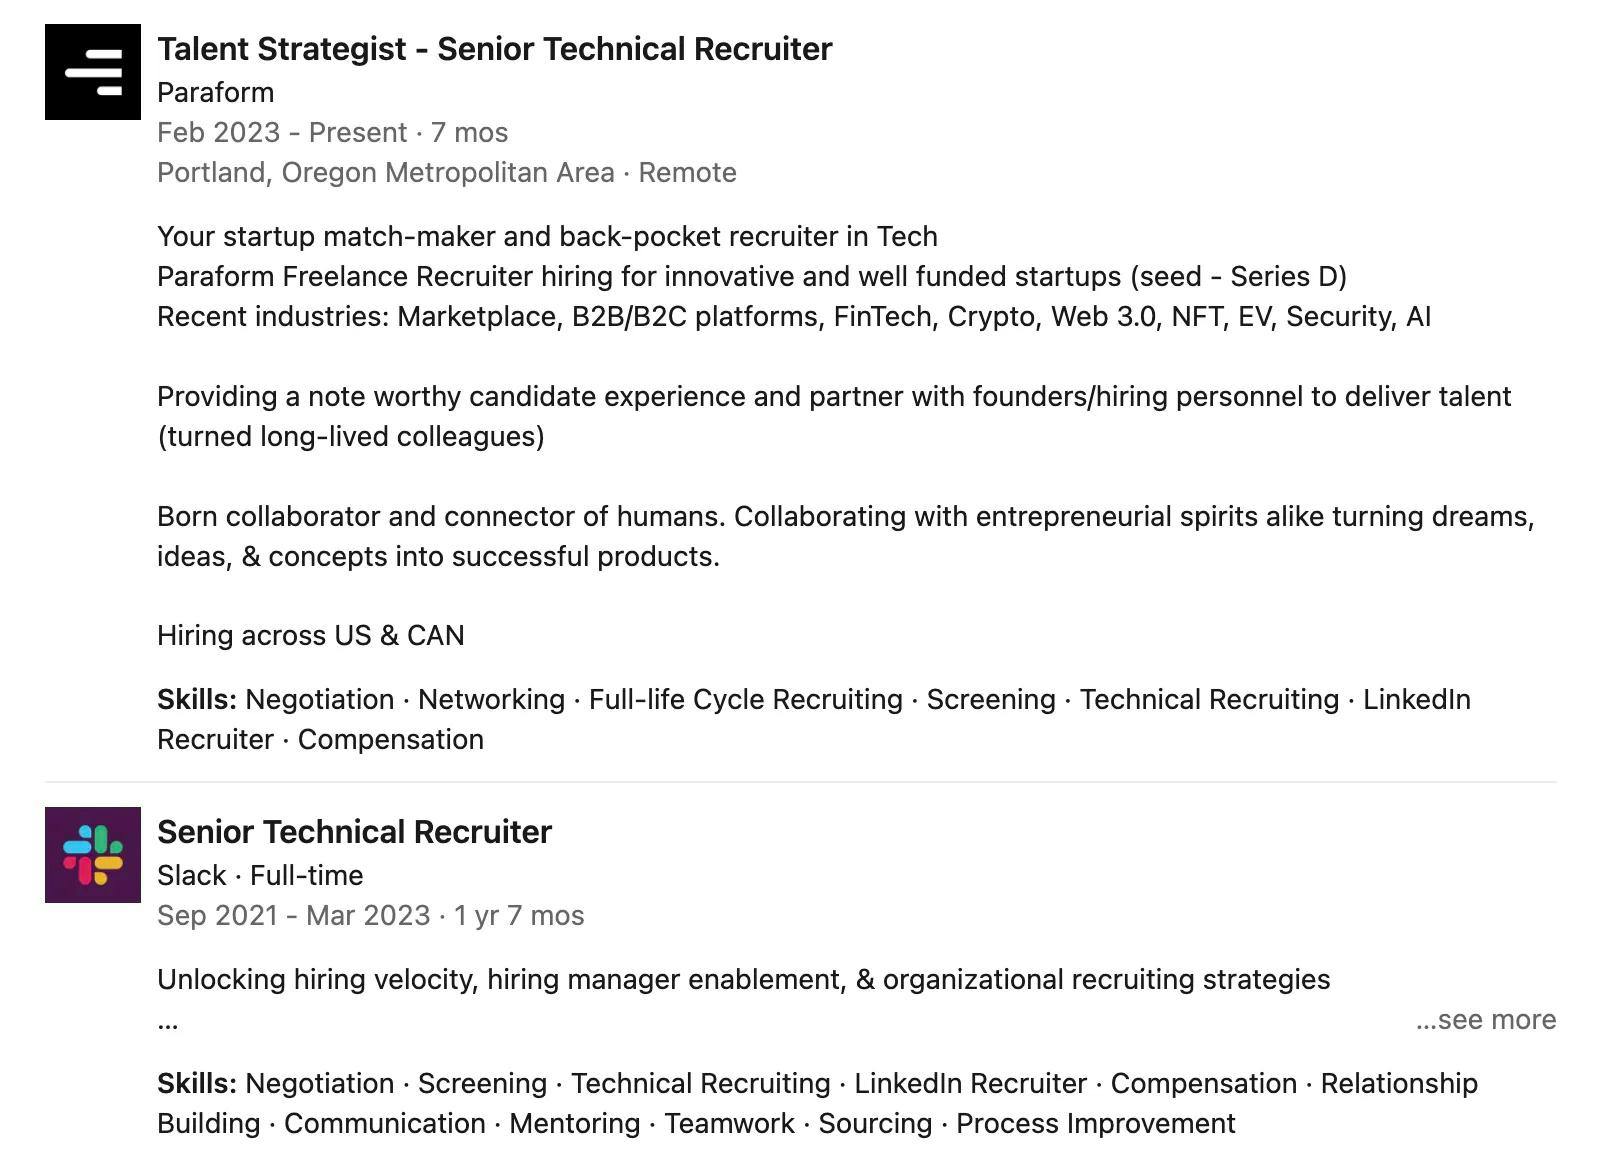 Here’s an example from one of the recruiters on Paraform